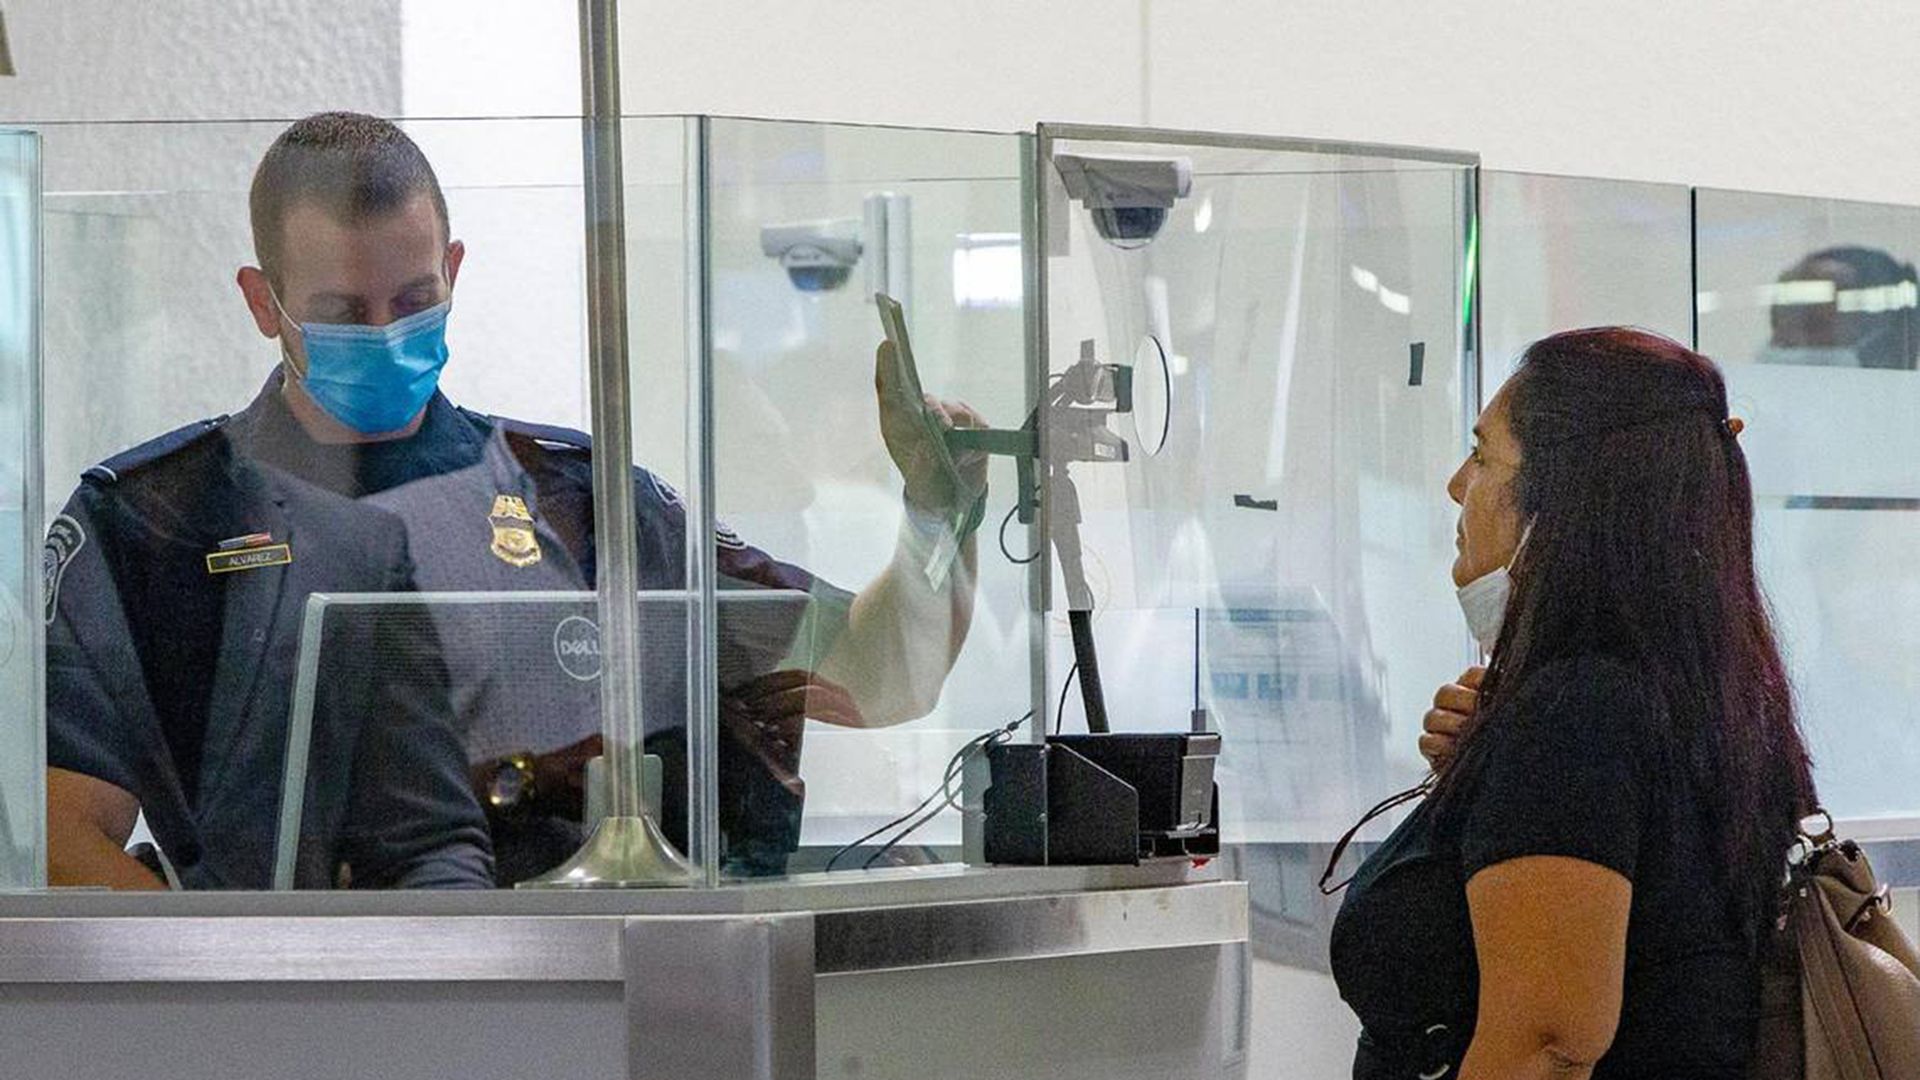 A U.S. Customs and Border Protection officer on Nov. 20, 2020, checks a passenger arriving on an international flight using facial-recognition technology to automate the manual document checks required for admission into the United States. 